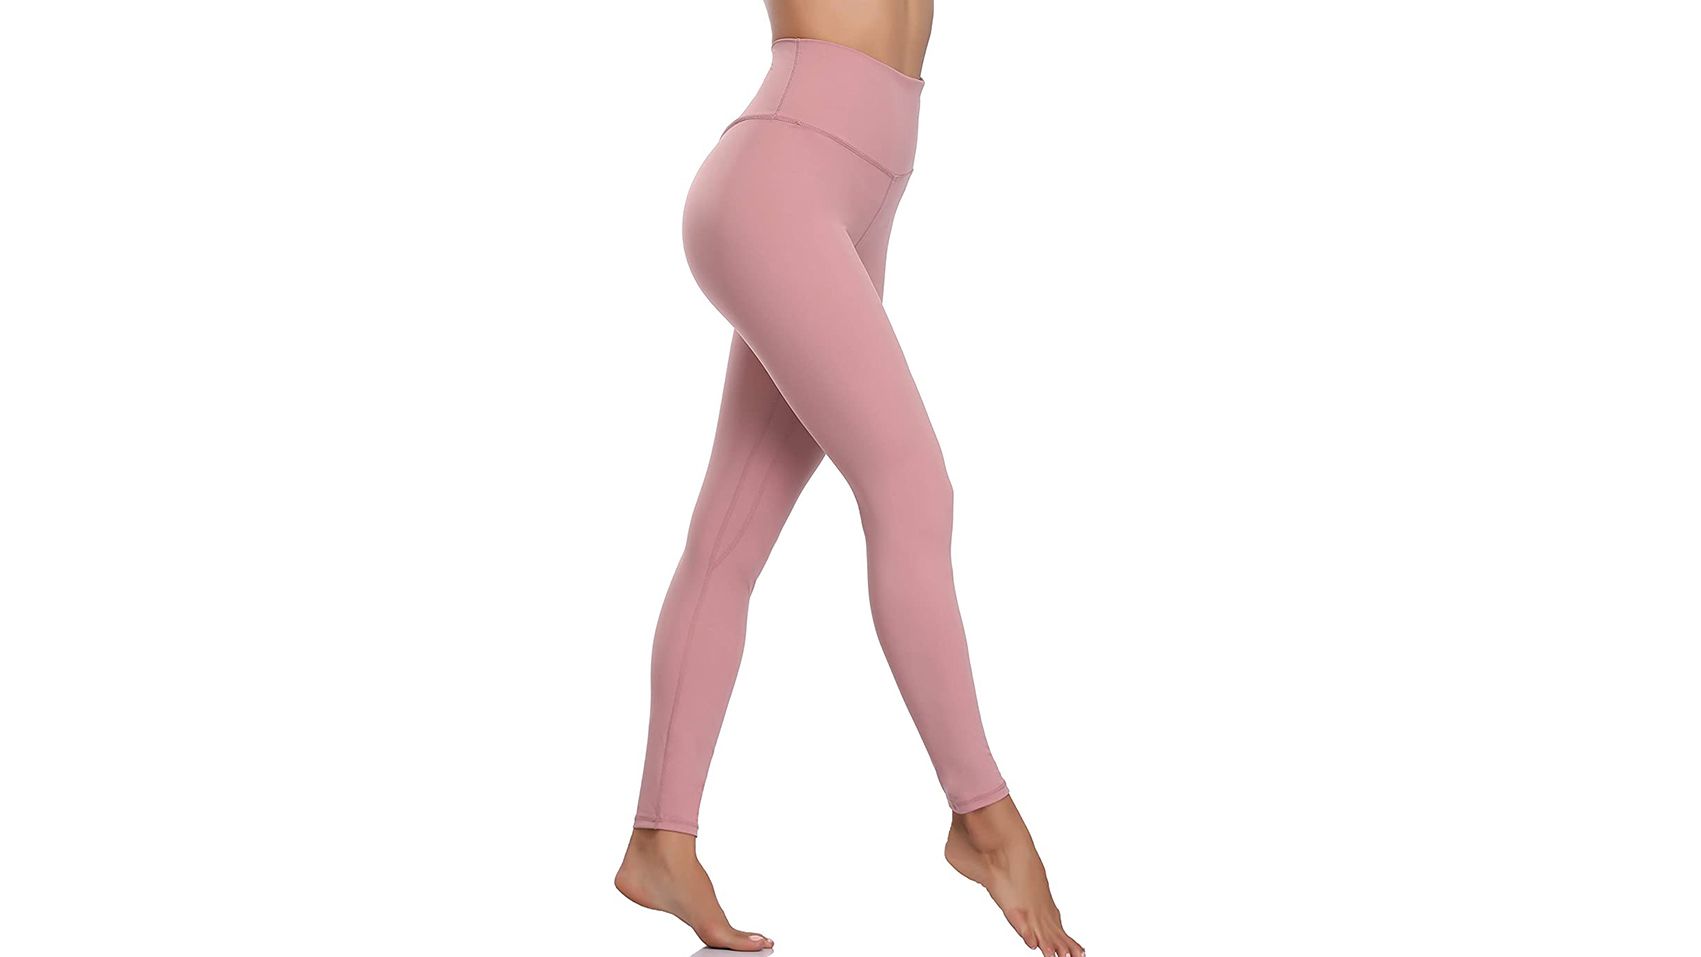 Some of the best leggings on ! Added them to my SF under “look a,  Align Leggings